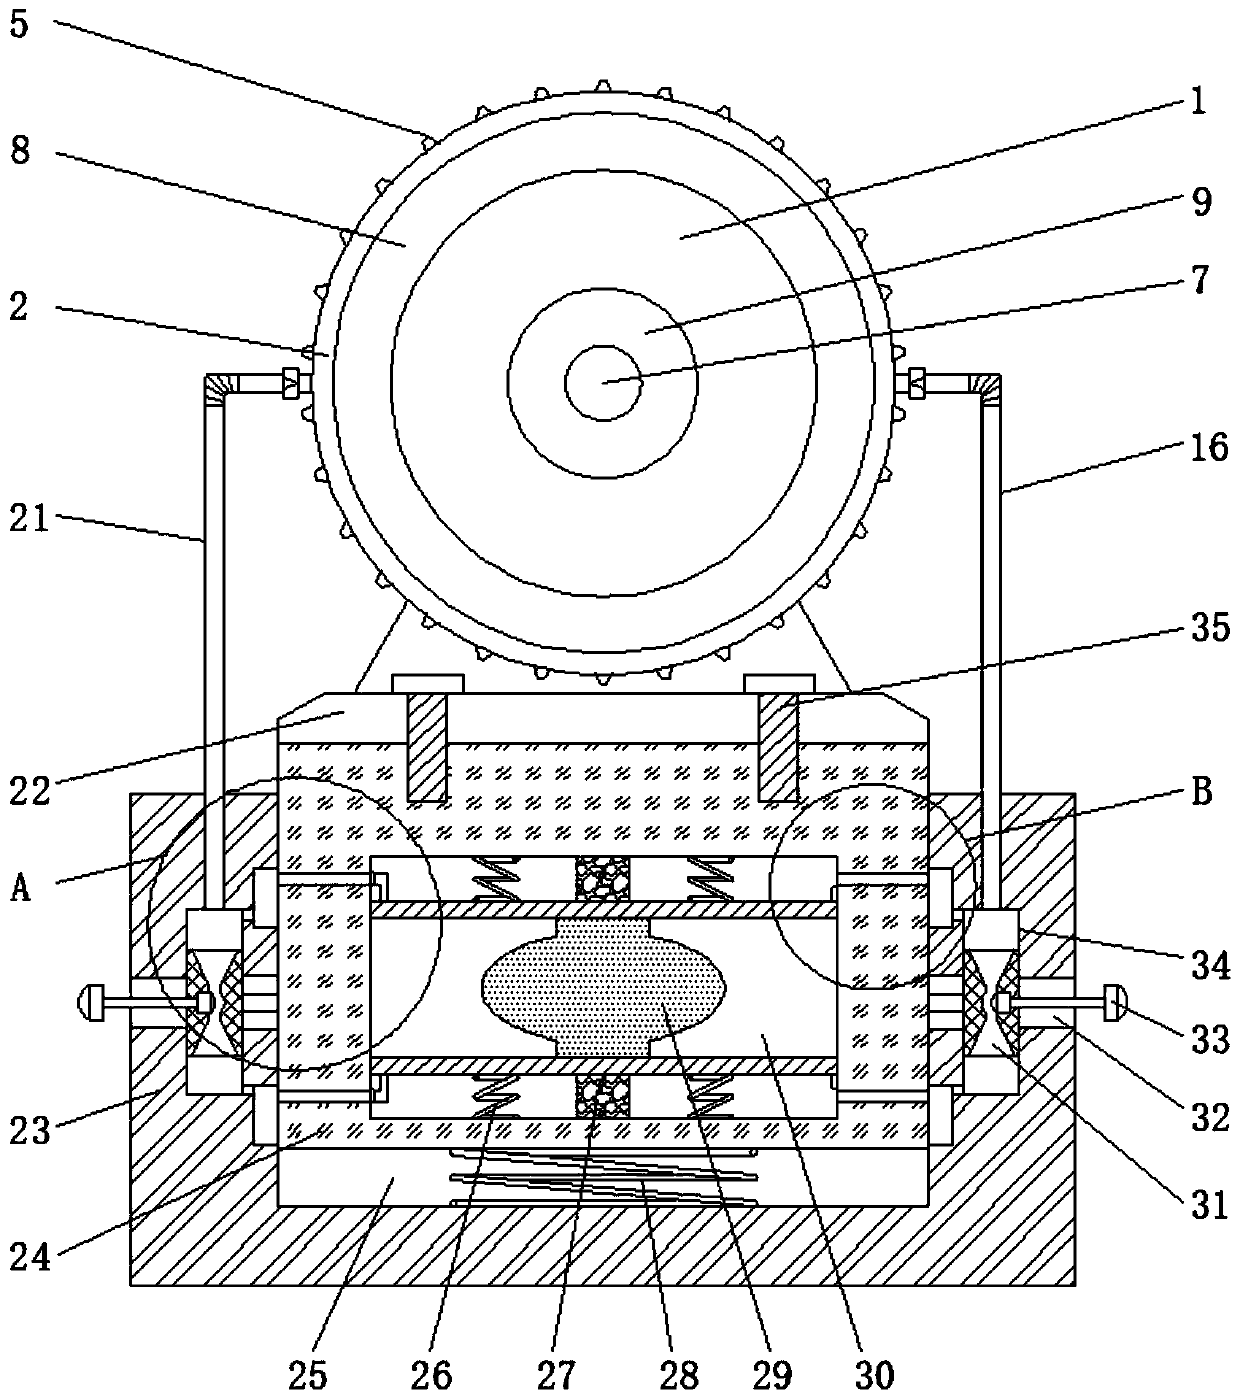 Motor with shock absorption and heat dissipation functions